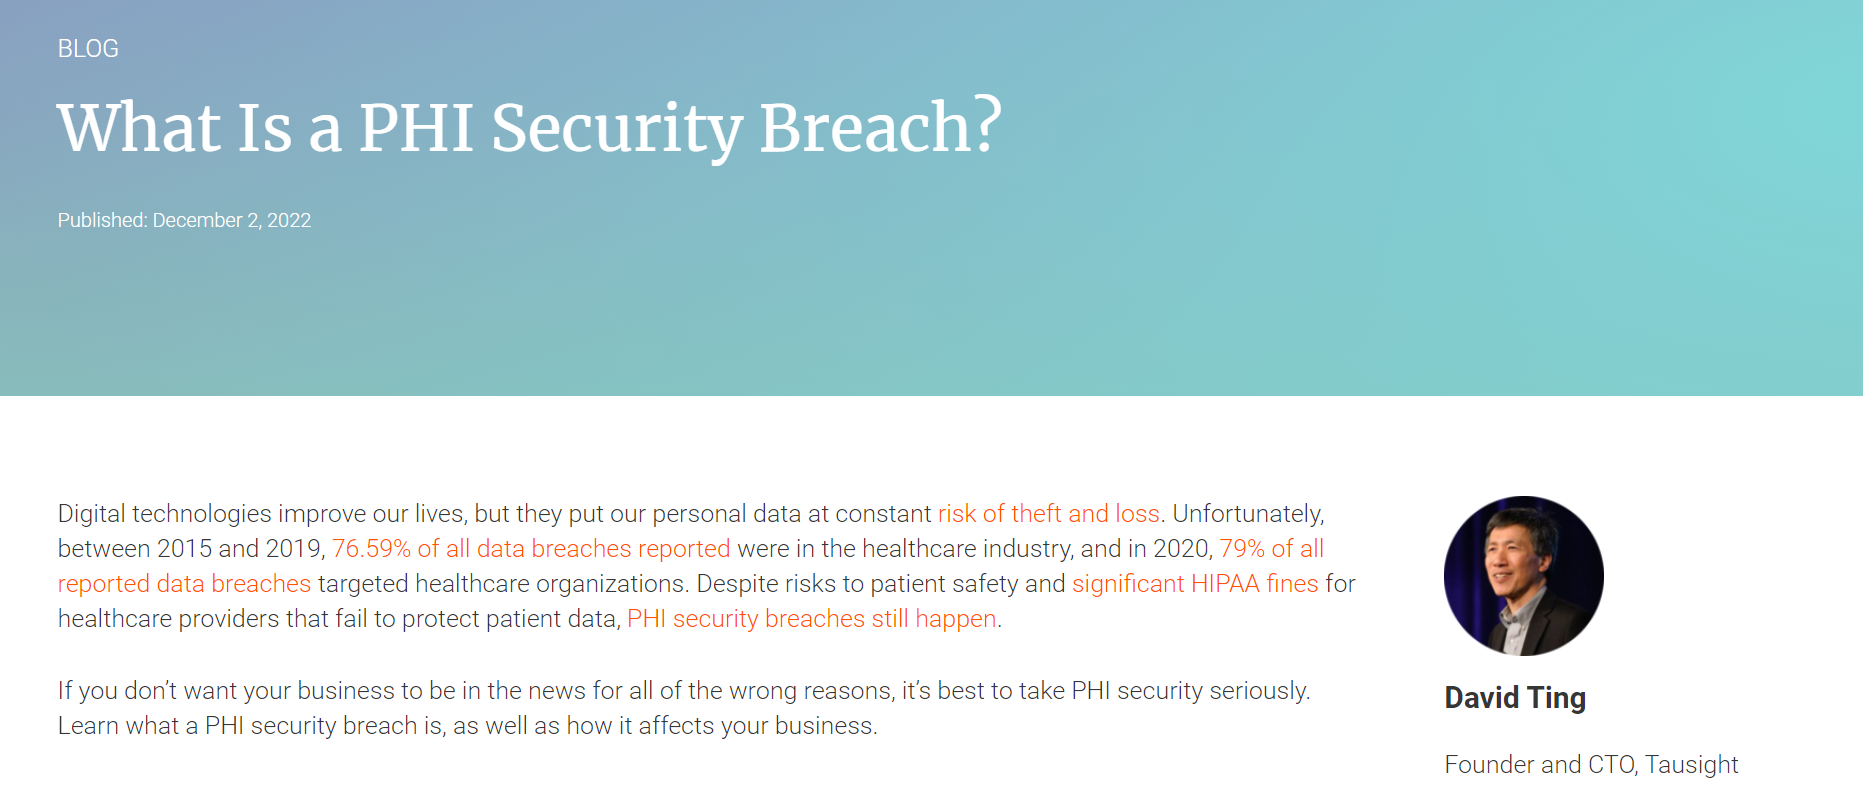 What Is a PHI Security Breach?